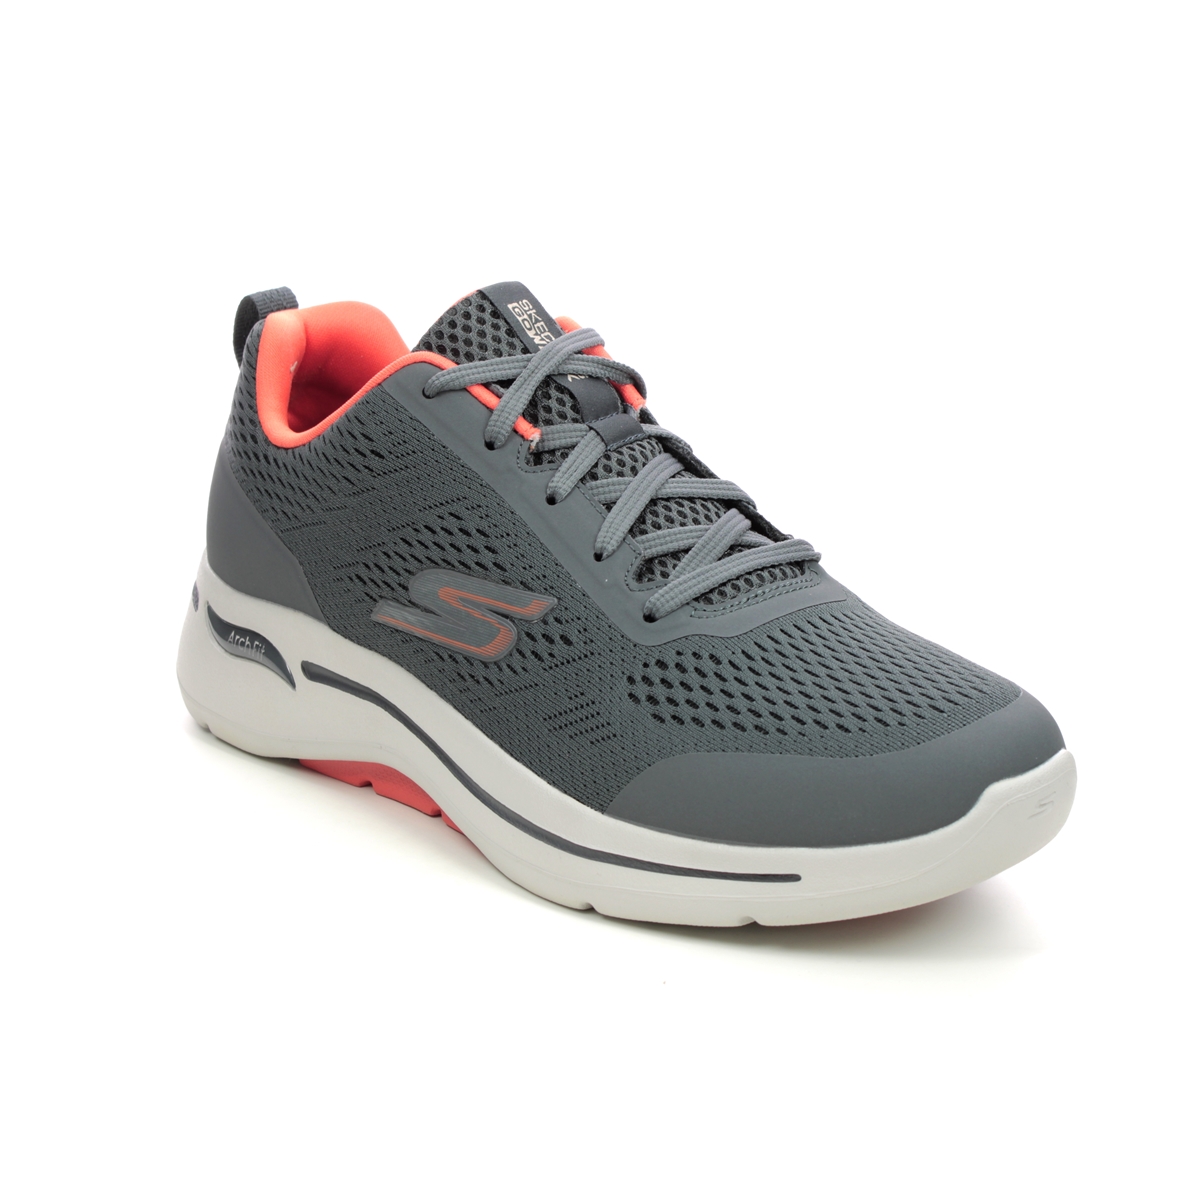 Skechers Arch Fit Go Walk Charcoal Grey Mens Trainers 216116 In Size 10 In Plain Charcoal Grey